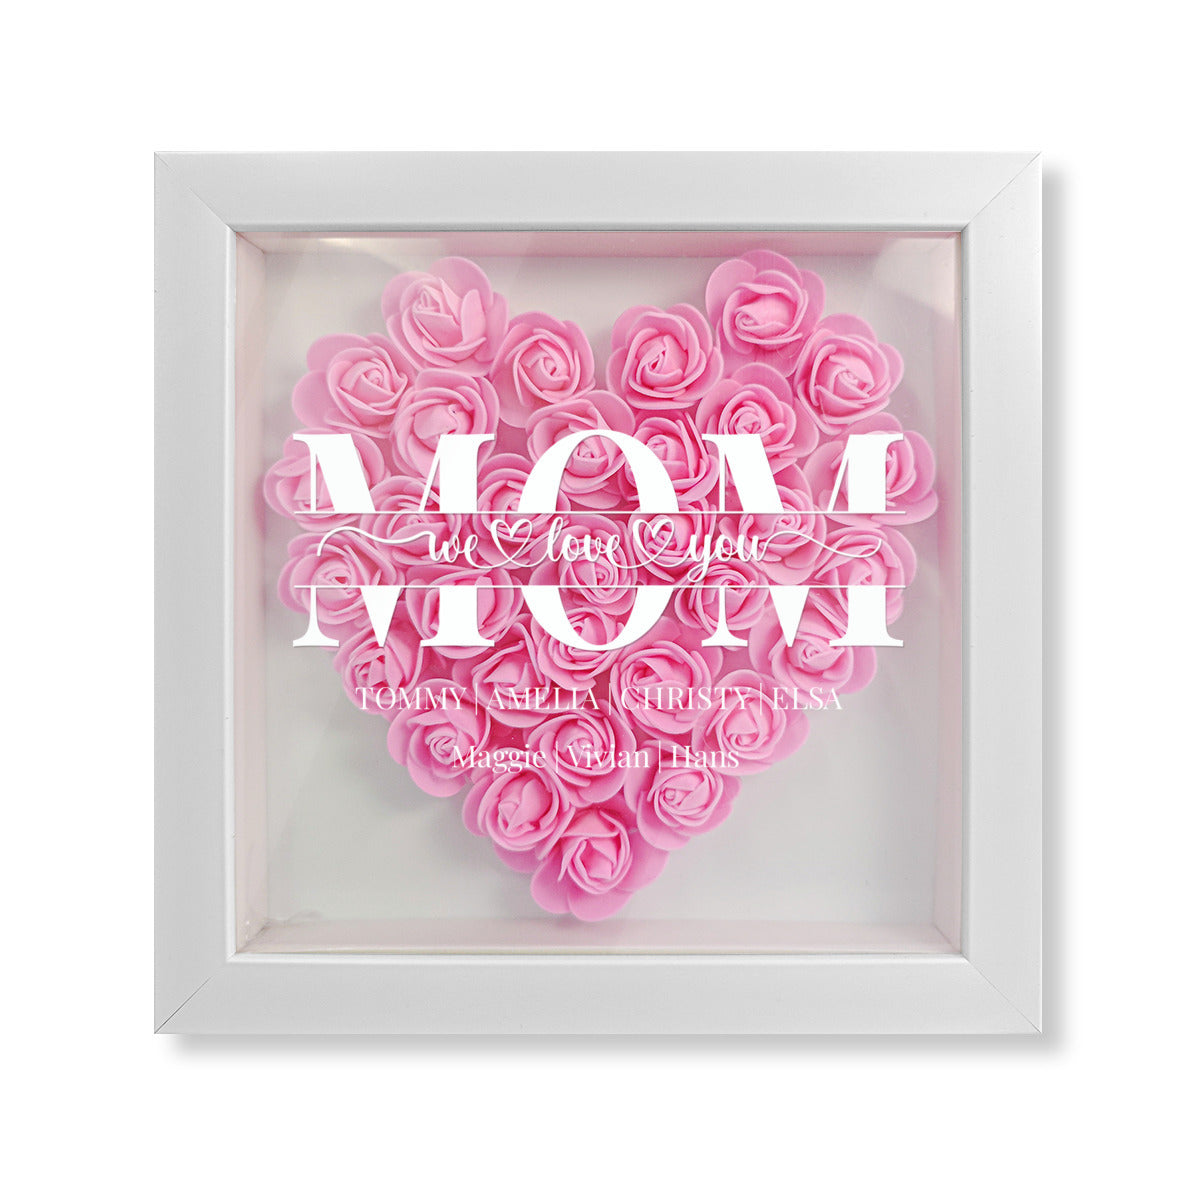 Mom We Love You - Personalized Flower Shadow Box Gift for MOM